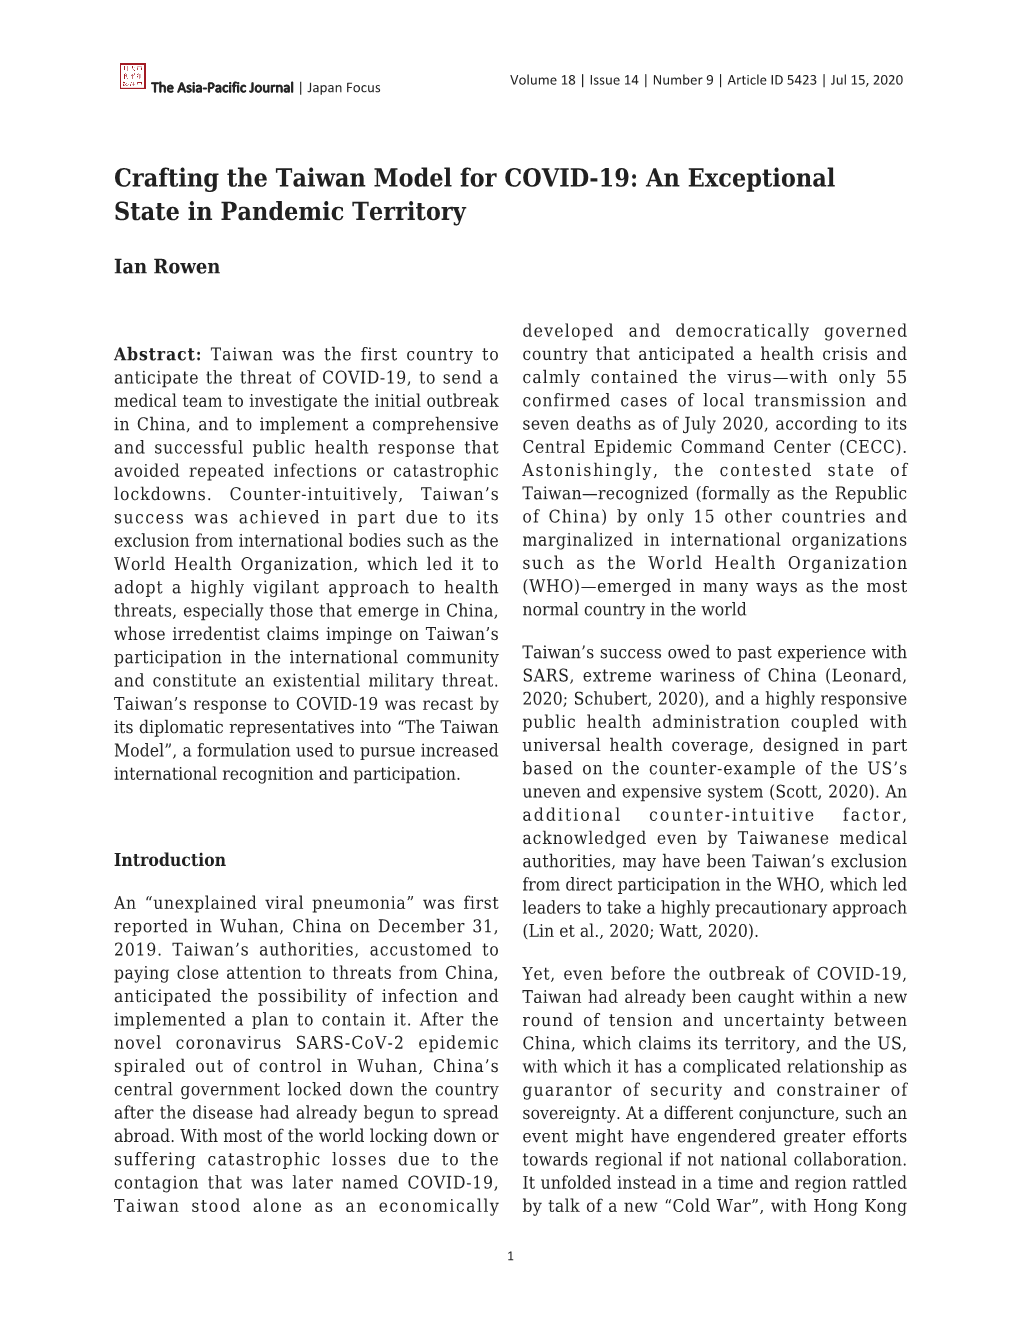 Crafting the Taiwan Model for COVID-19: an Exceptional State in Pandemic Territory